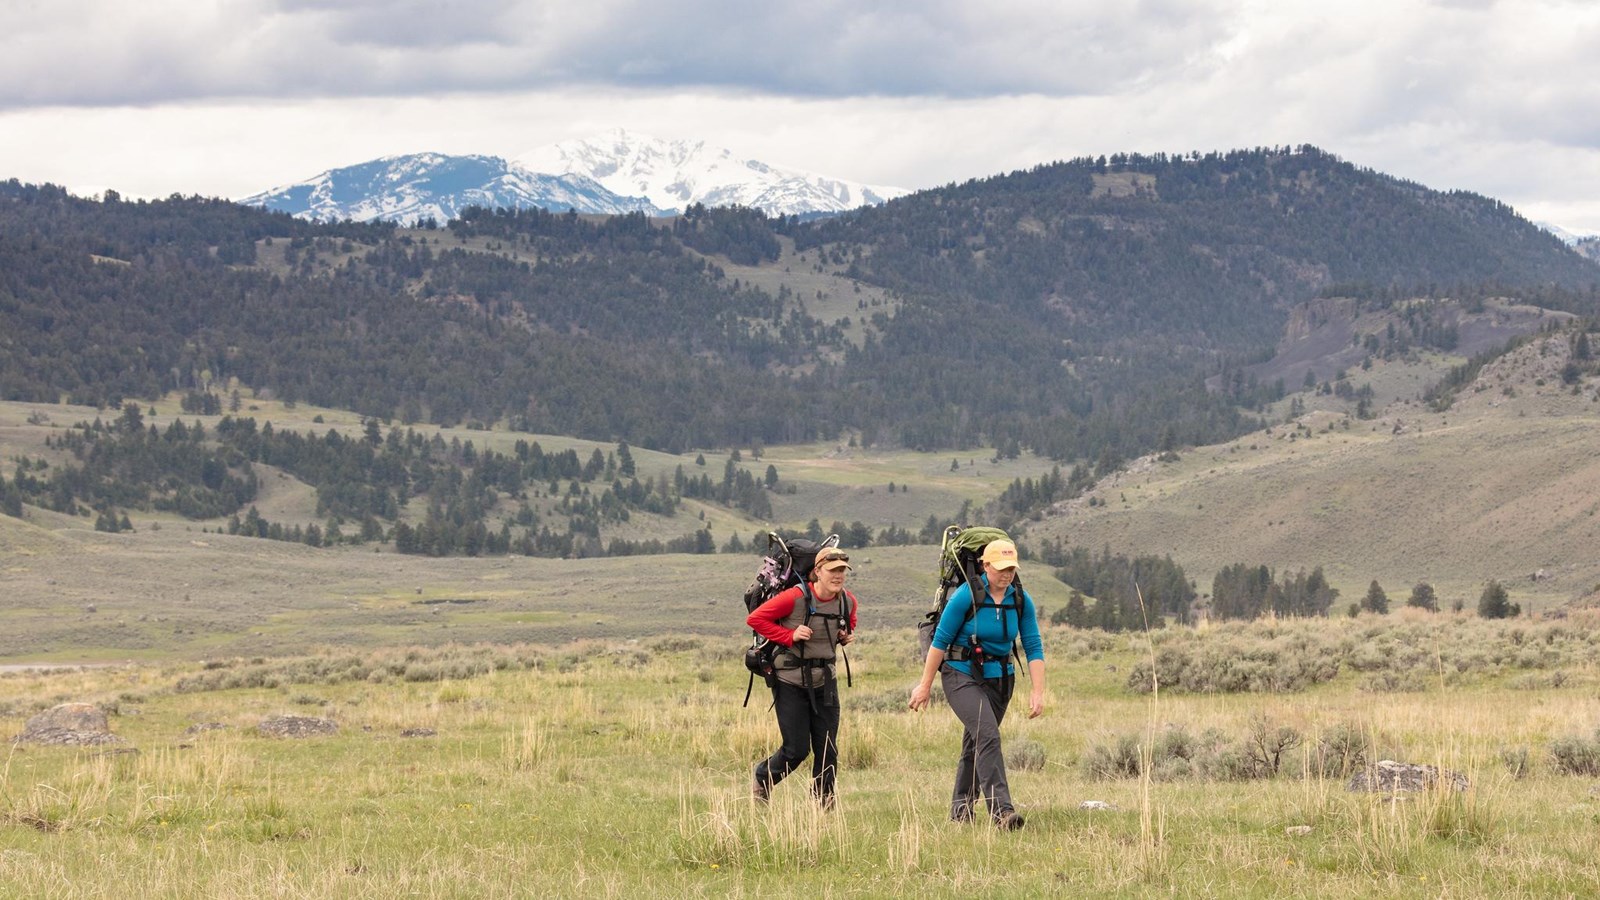 Two backpackers walk through a grassy meadow with mountains in the background.